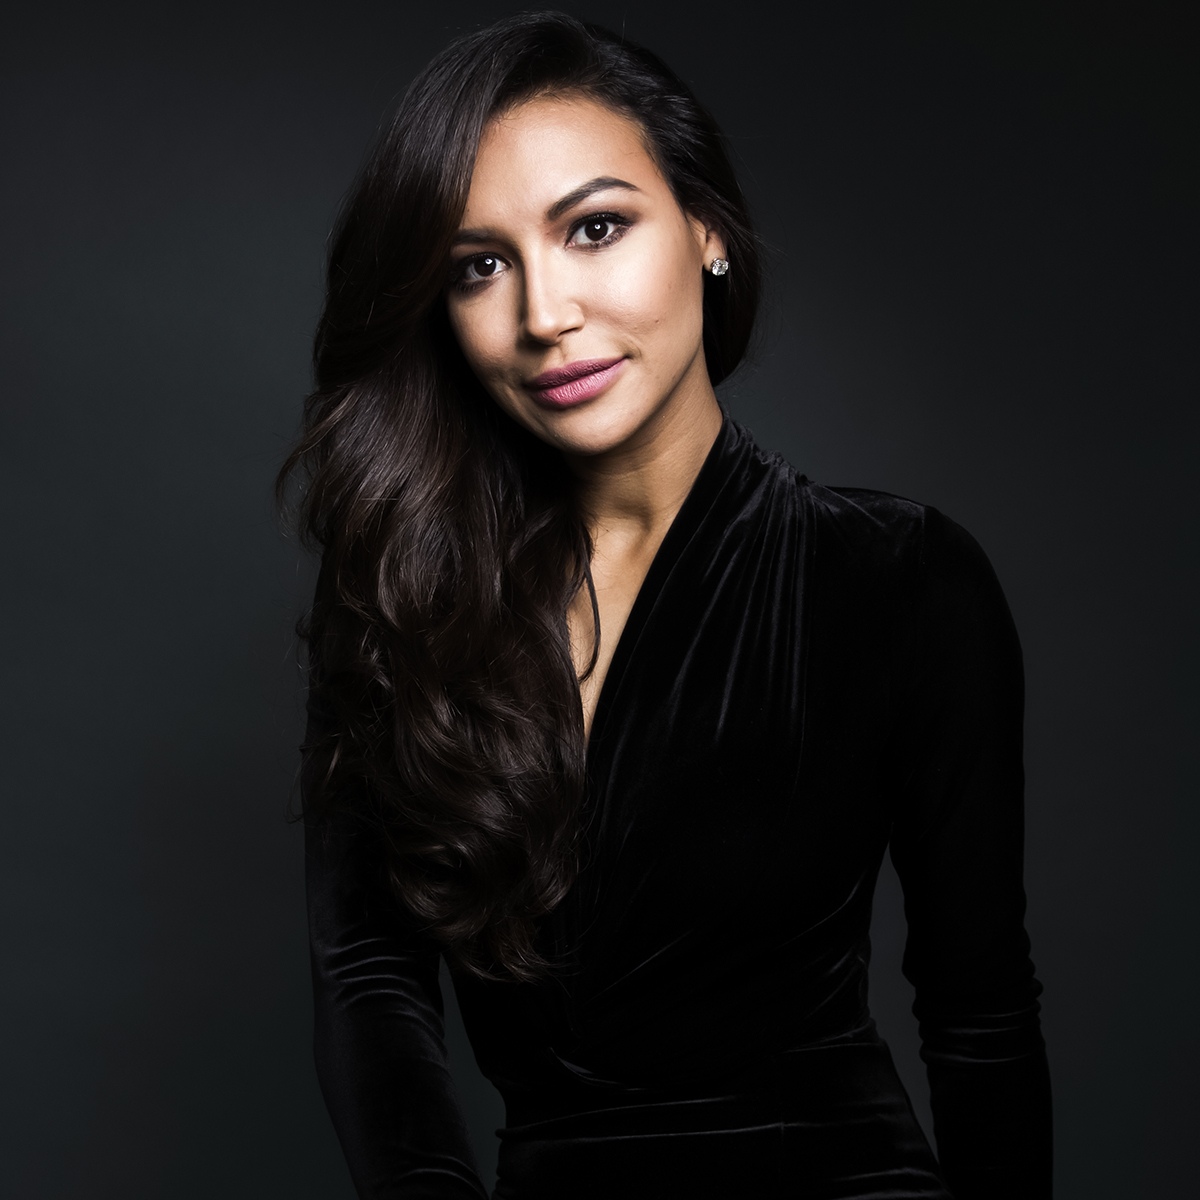 Naya Rivera Honored by Glee Stars 2 Years After Her Death